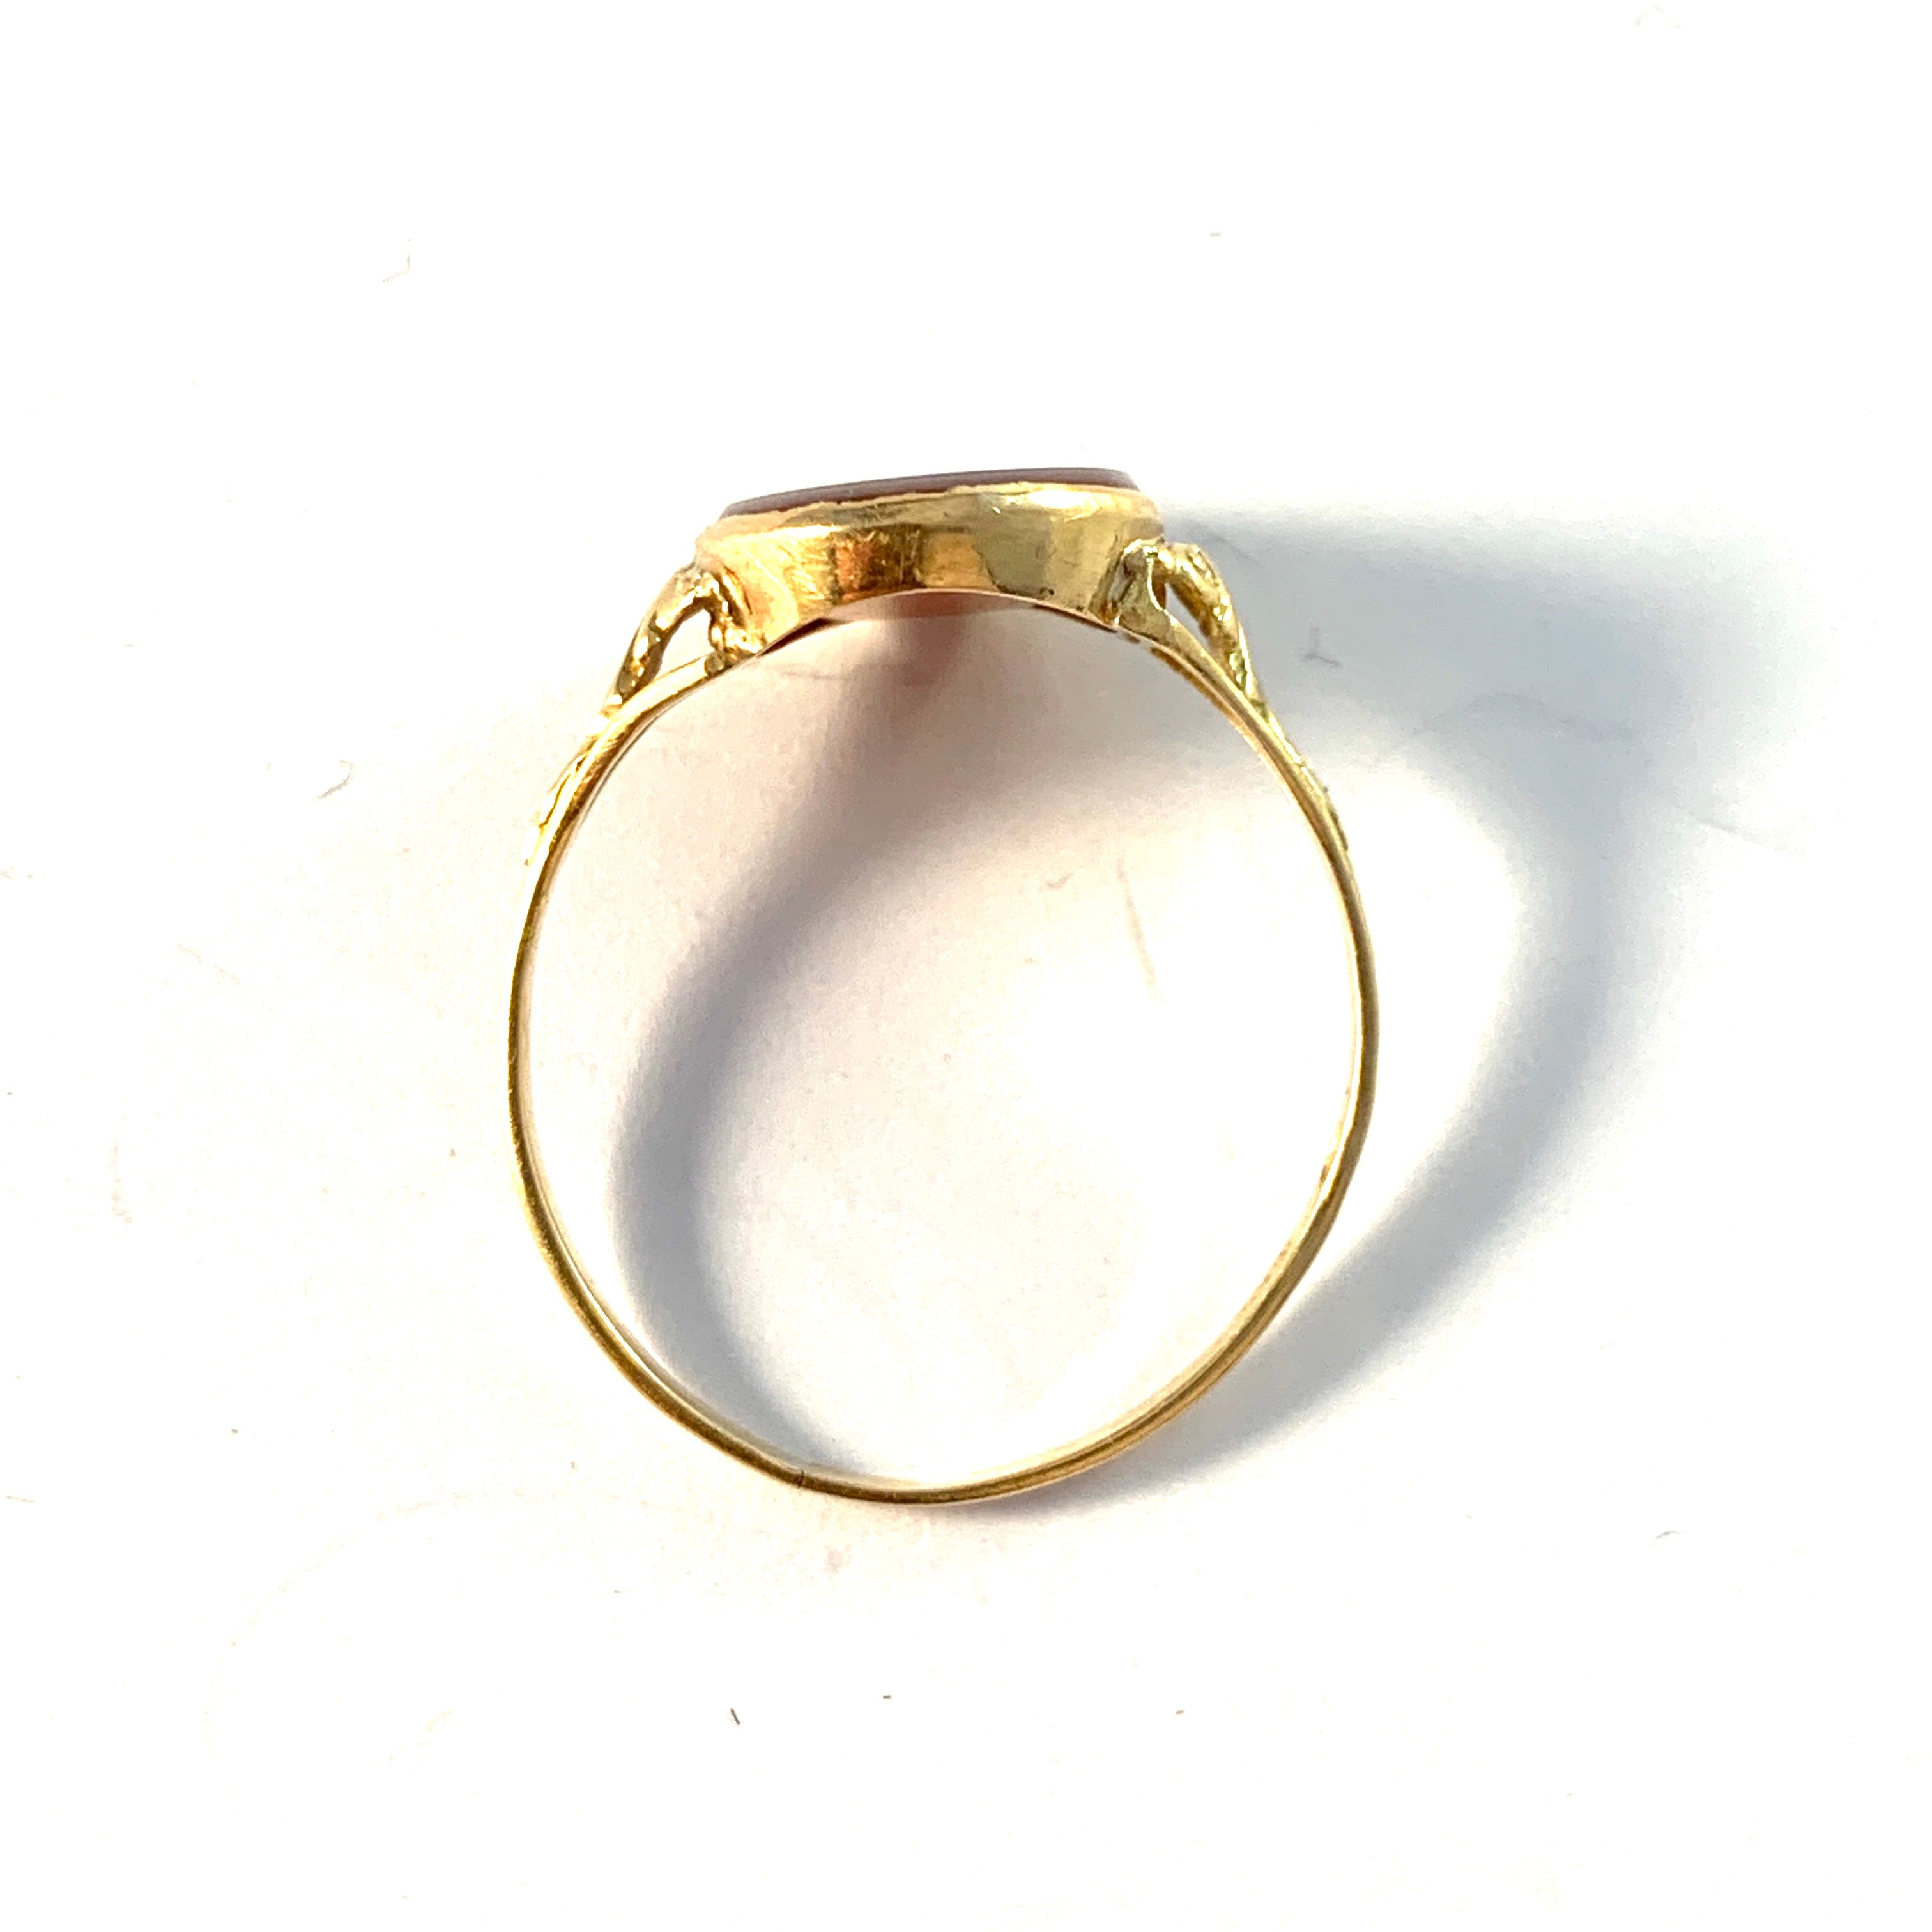 Early to mid 1900s. 18k Gold Carnelian Signet Ring.